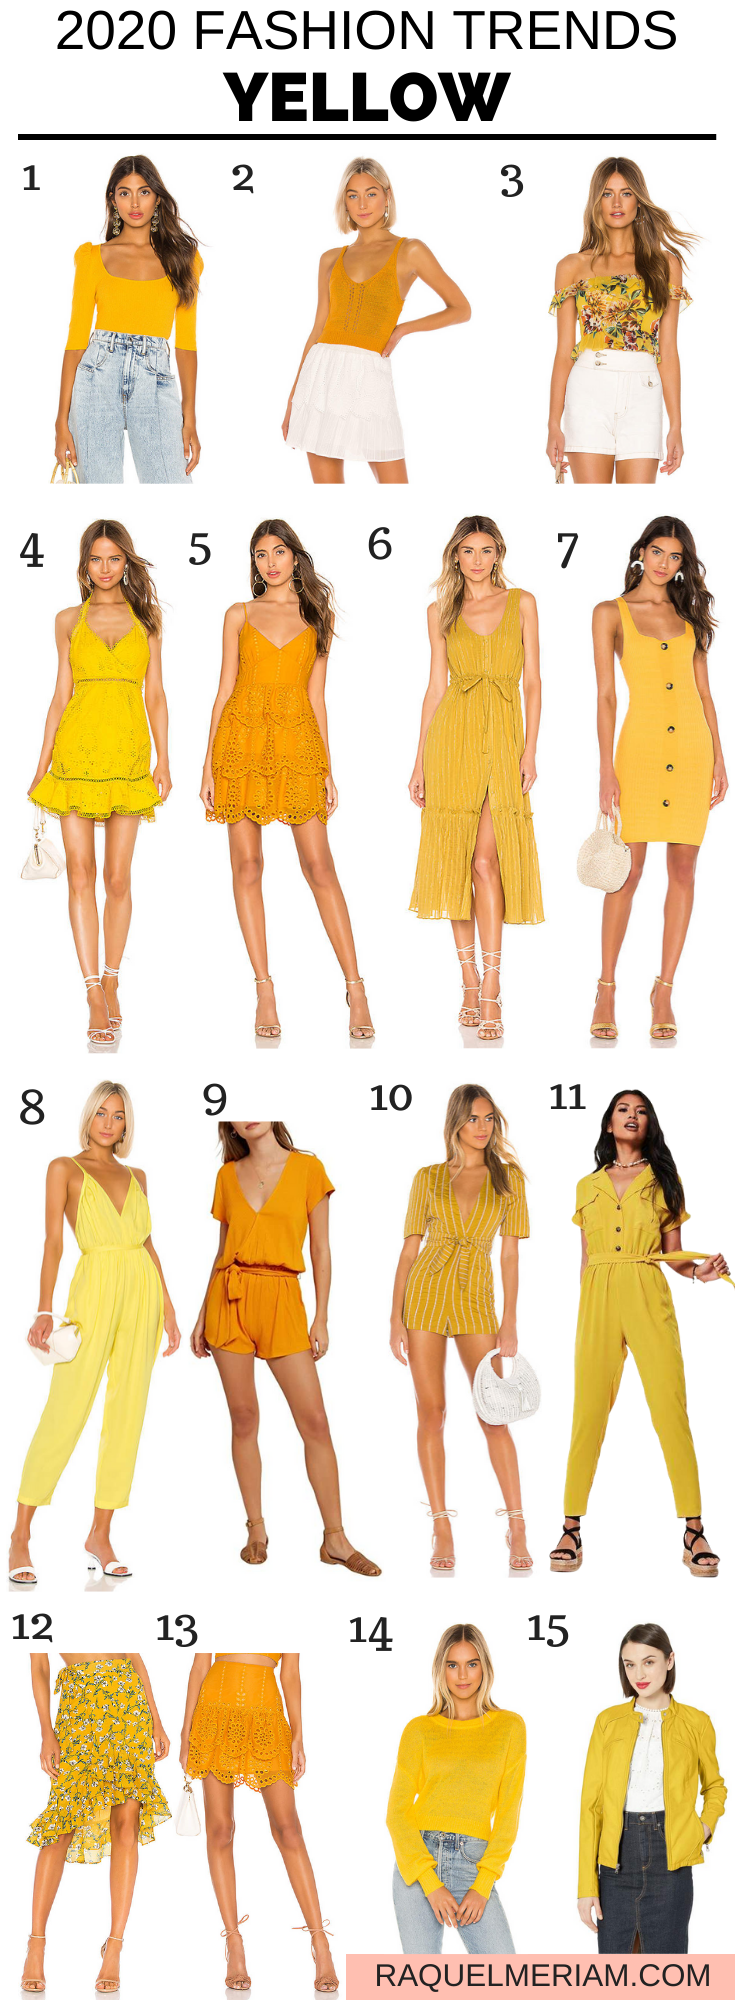 2020 Fashion Trends - Yellow